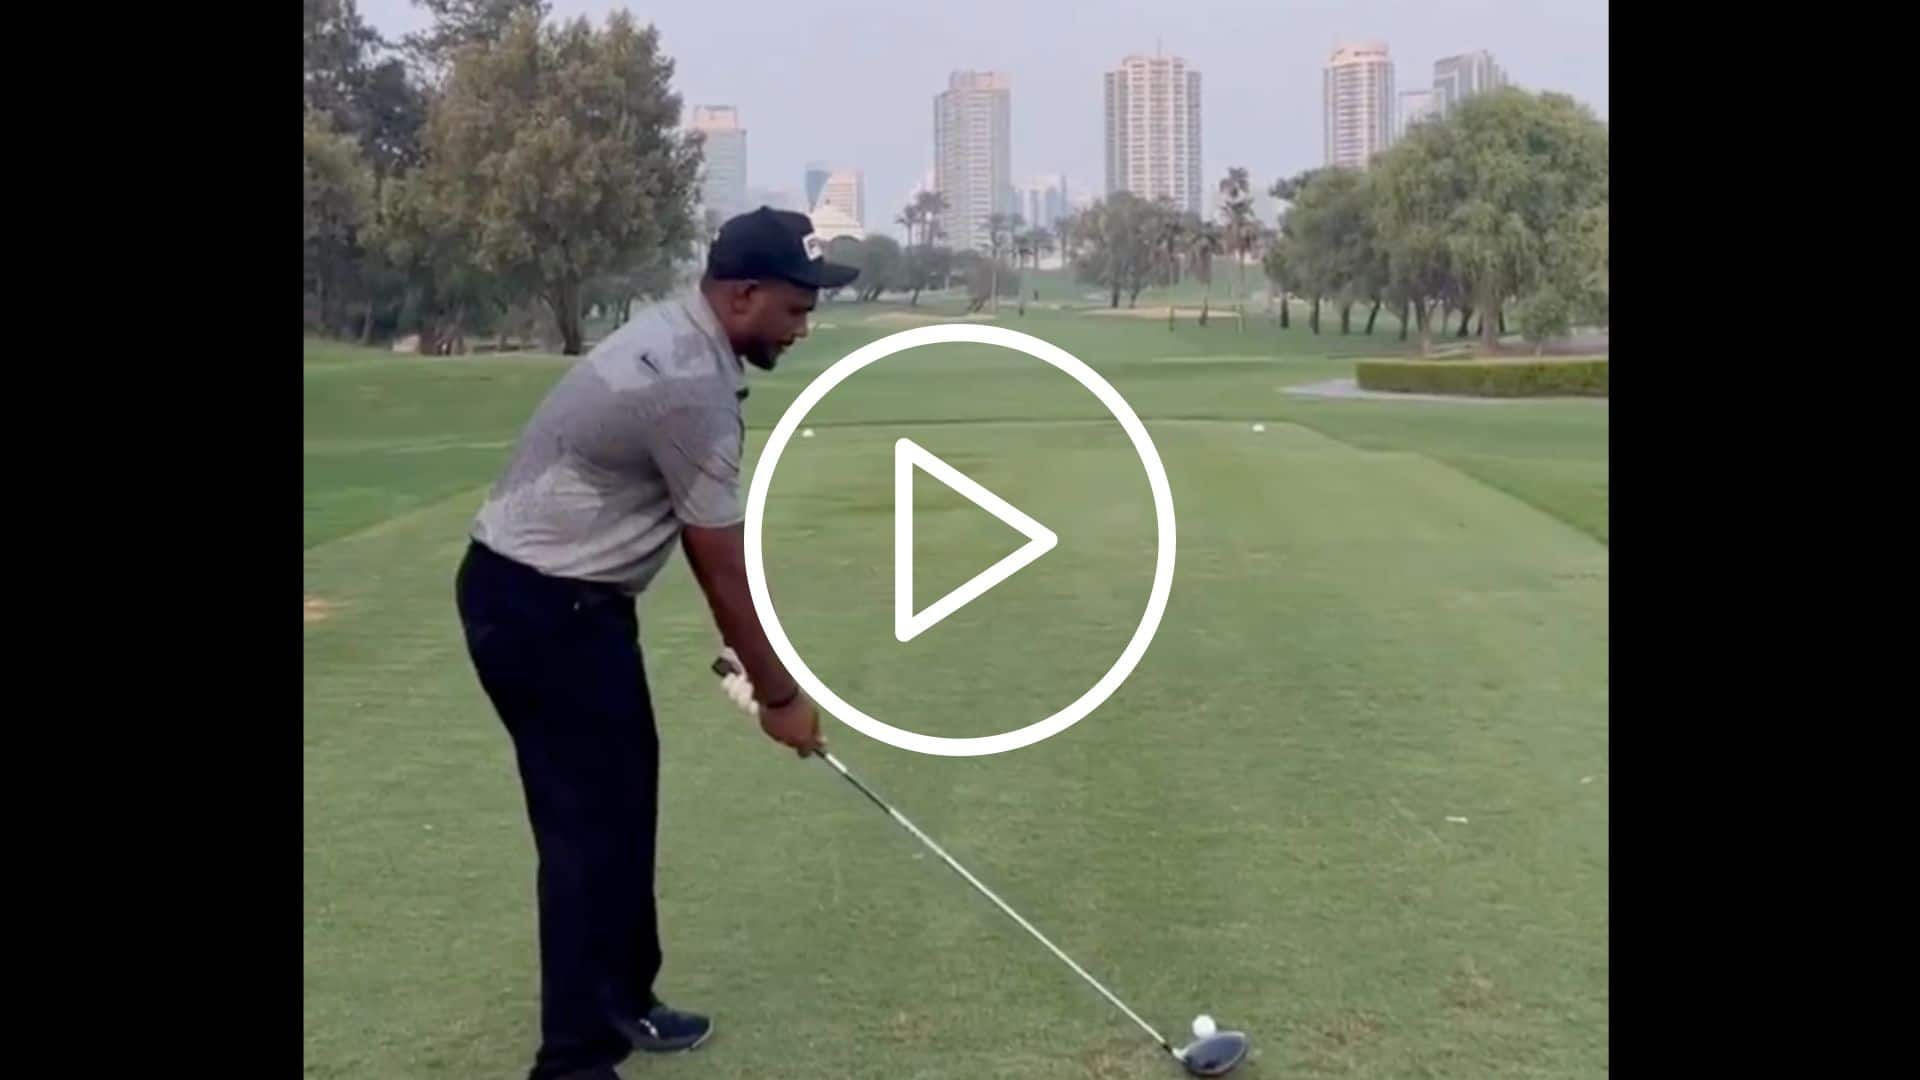 [Watch] Sanju Samson Plays Golf In Dubai After Asia Cup And World Cup Omission